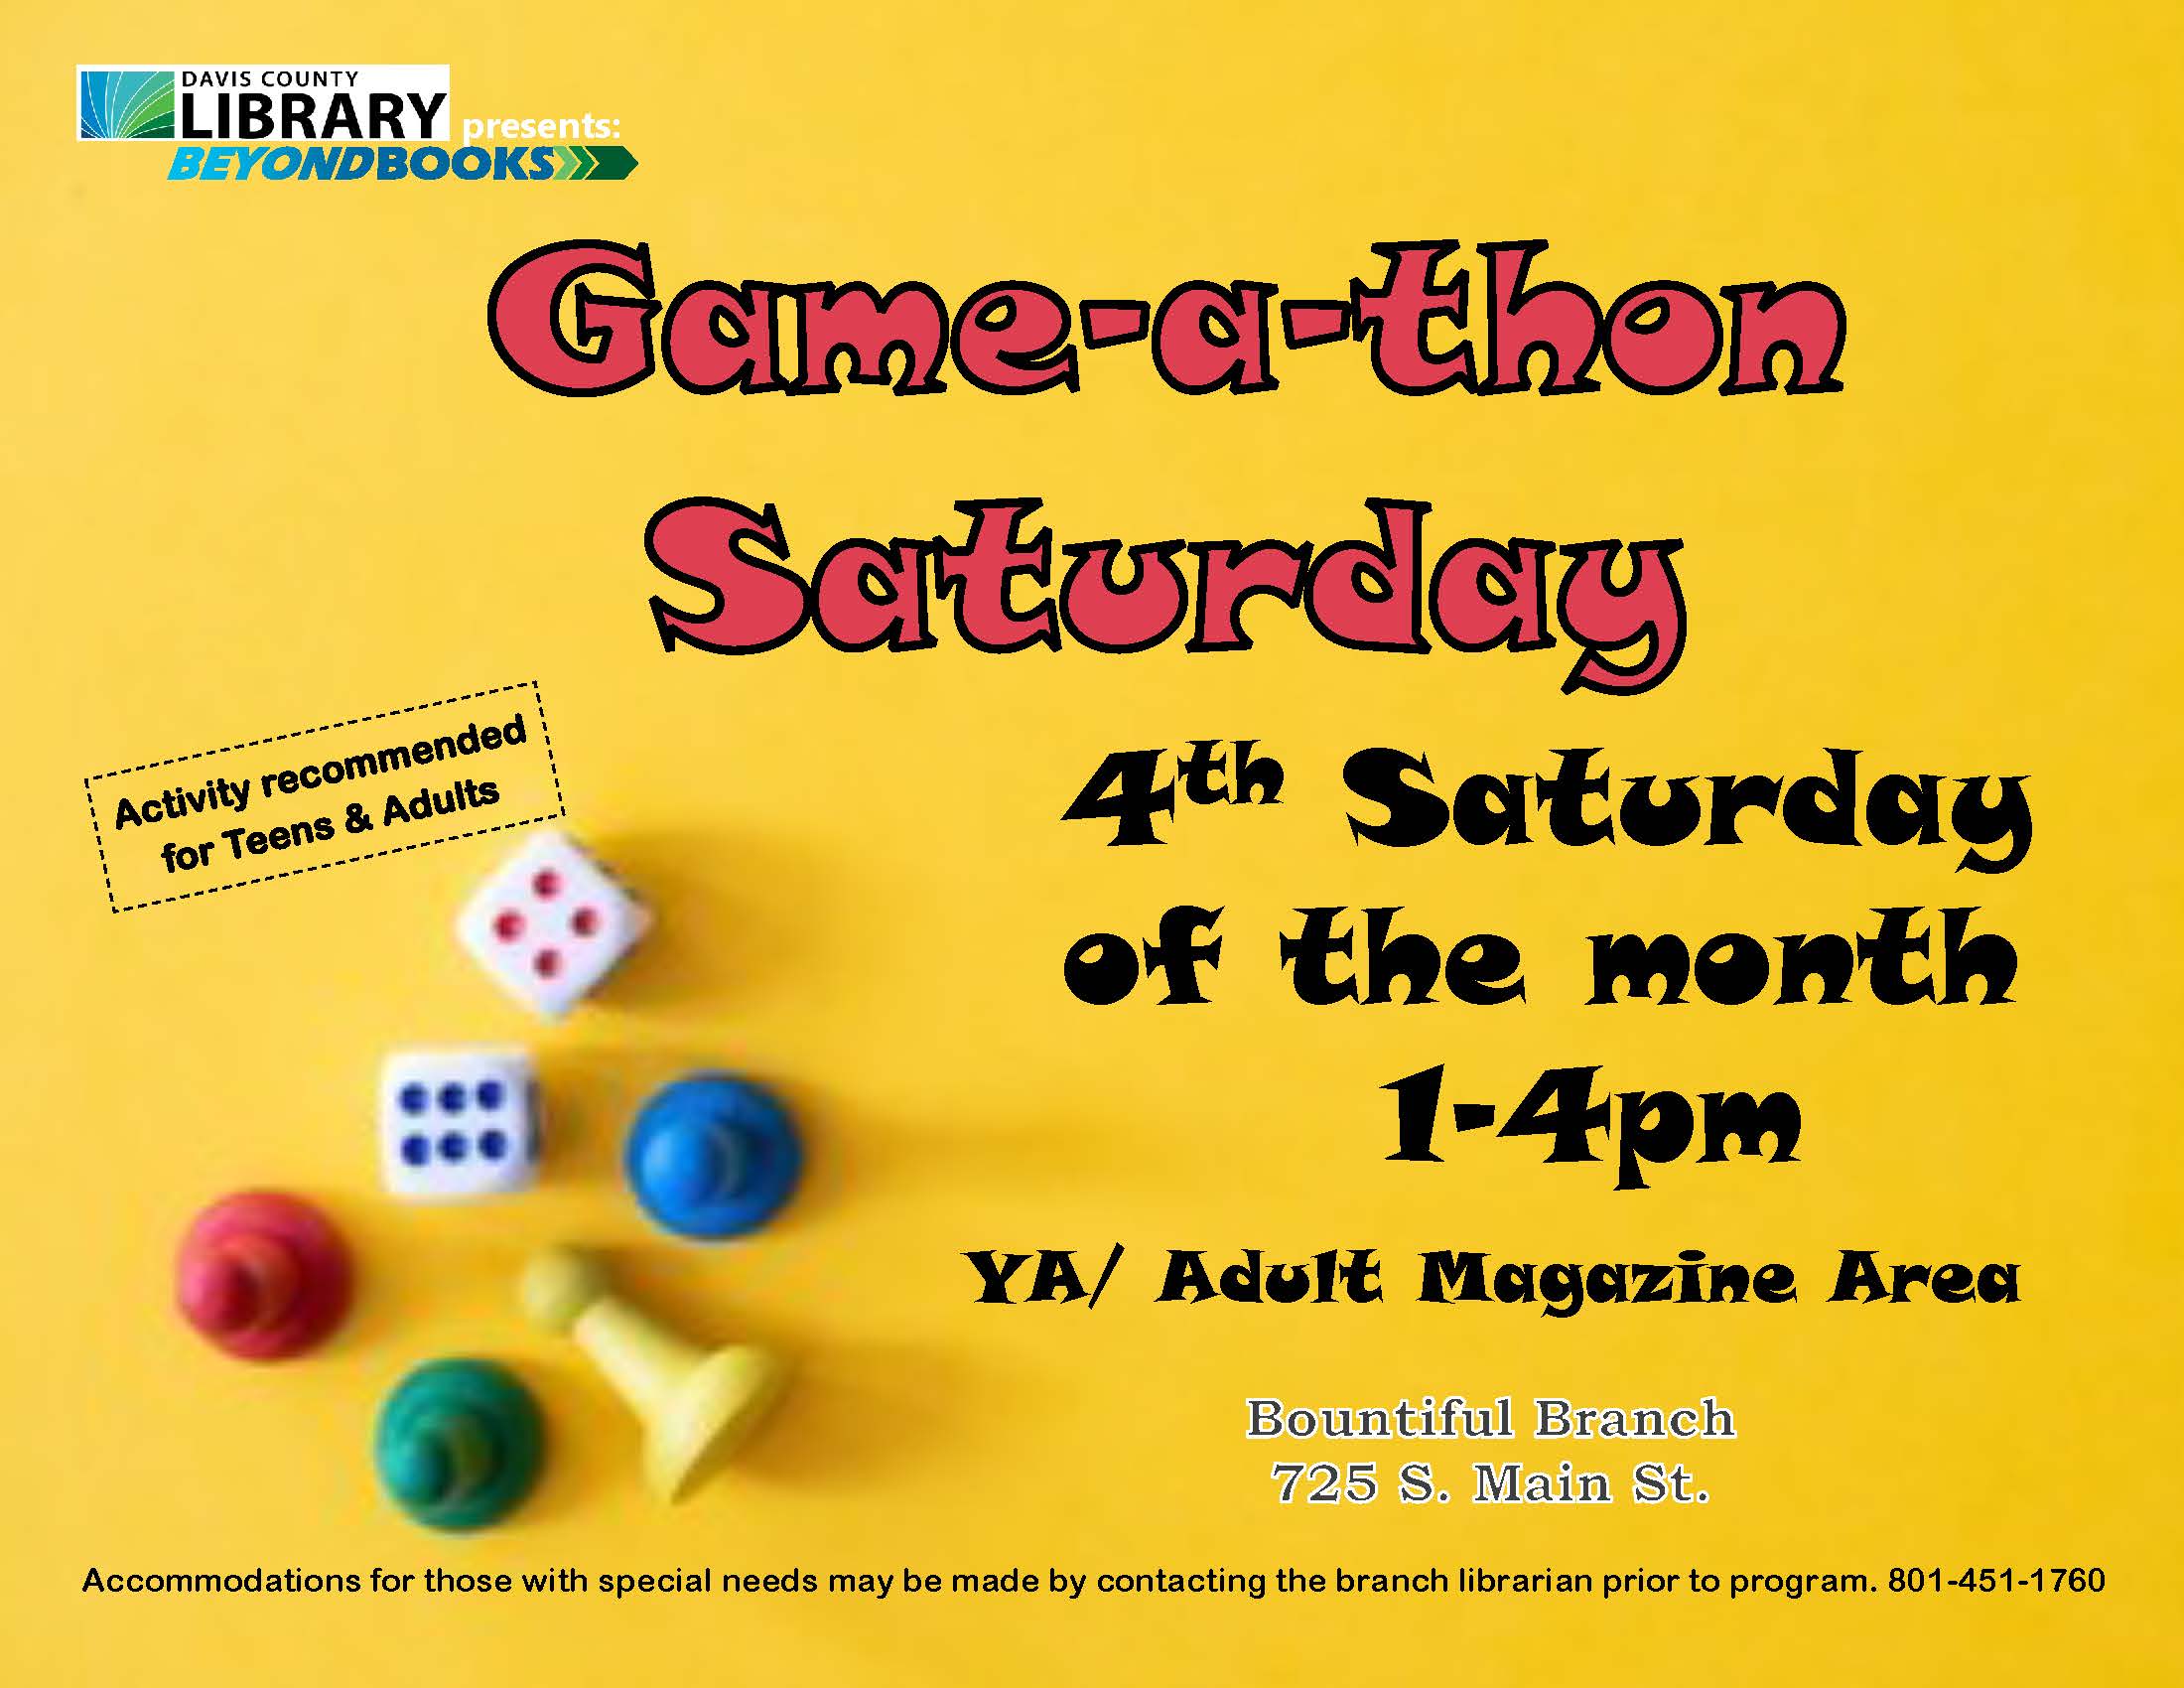 Game-a-thon Saturdays at the Bountiful Branch Library for teens and adults.  4th Saturday of every month from 1-4 pm in the Young Adult area.  Games for all skill levels and interests, plus coloring pages!